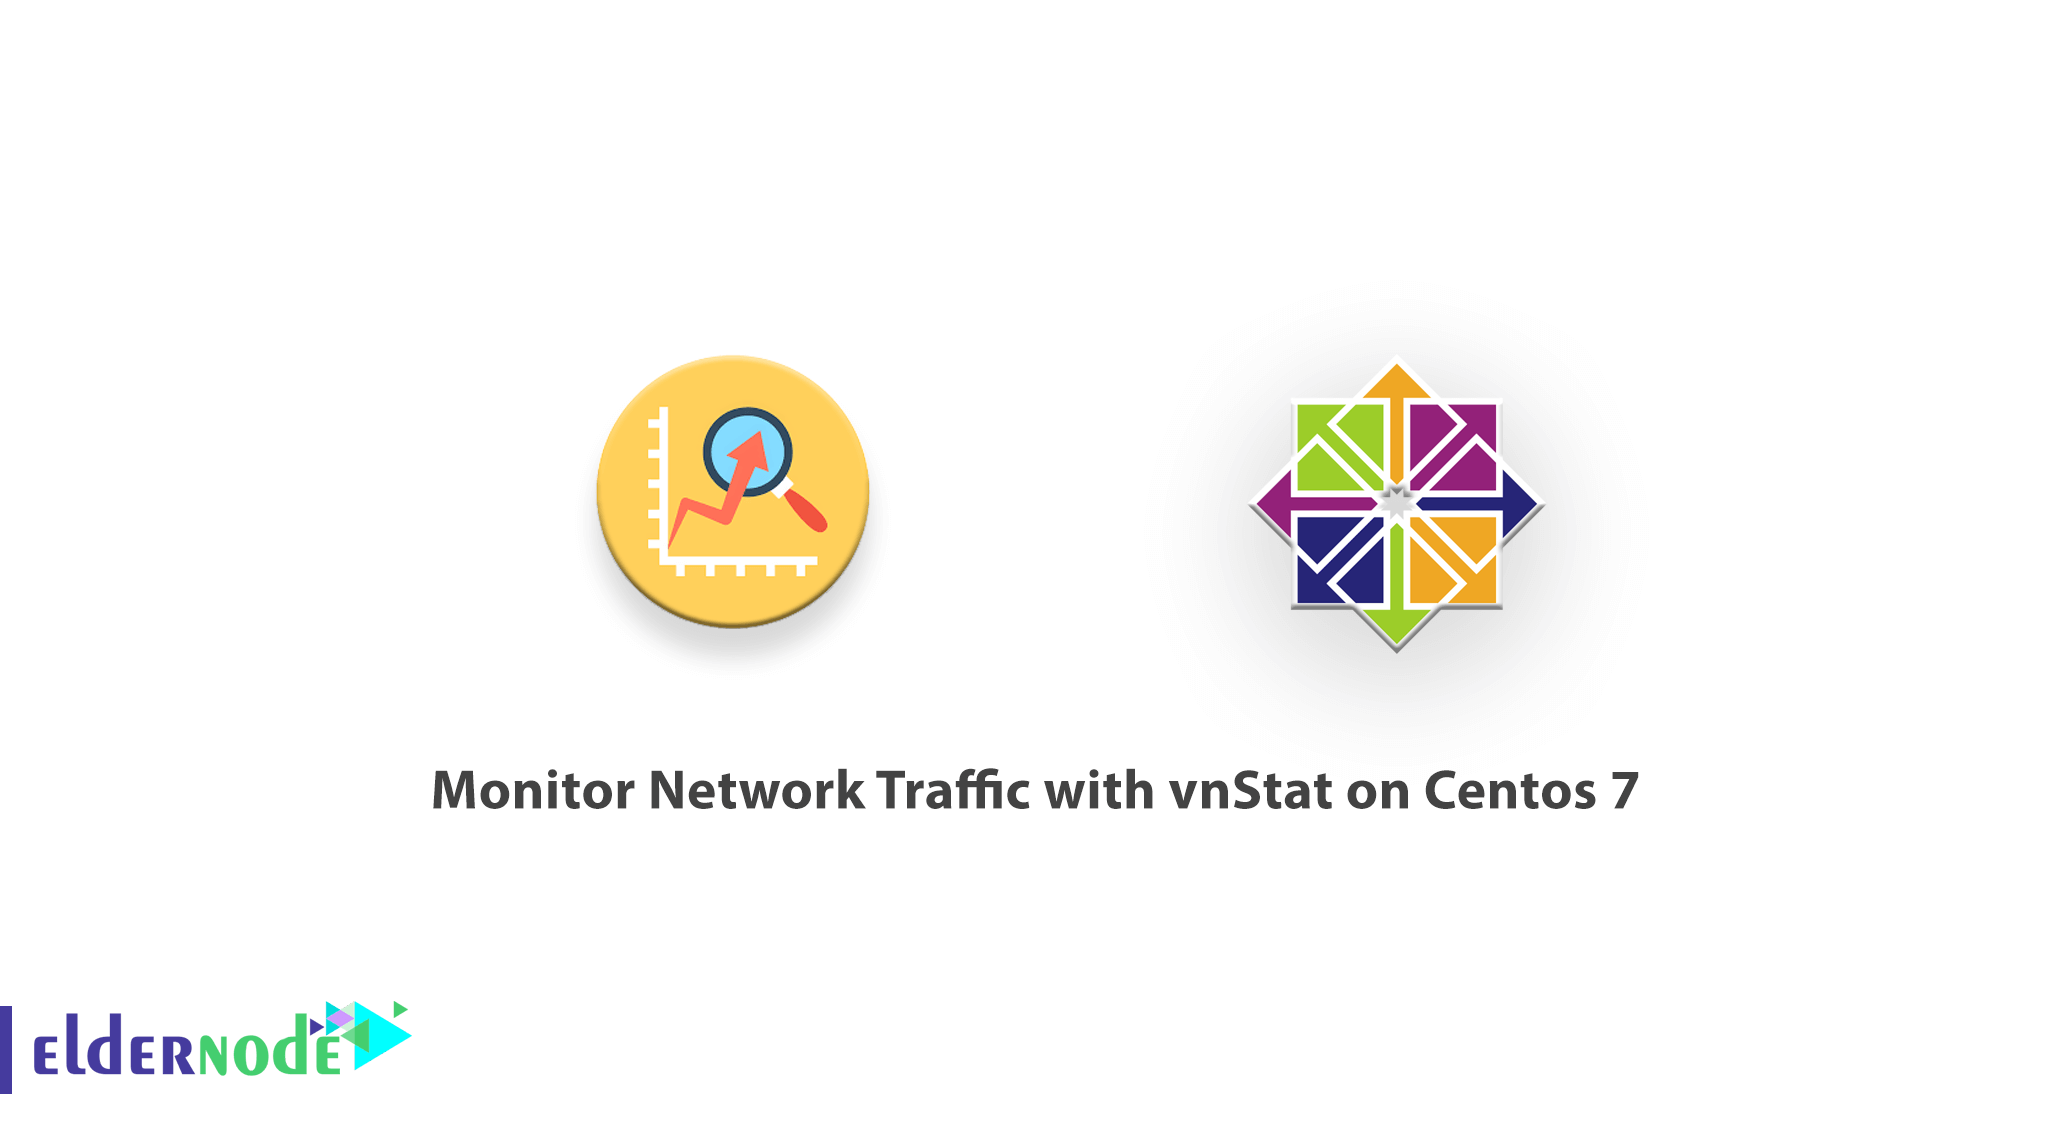 Monitor Network Traffic with vnStat on Centos 7